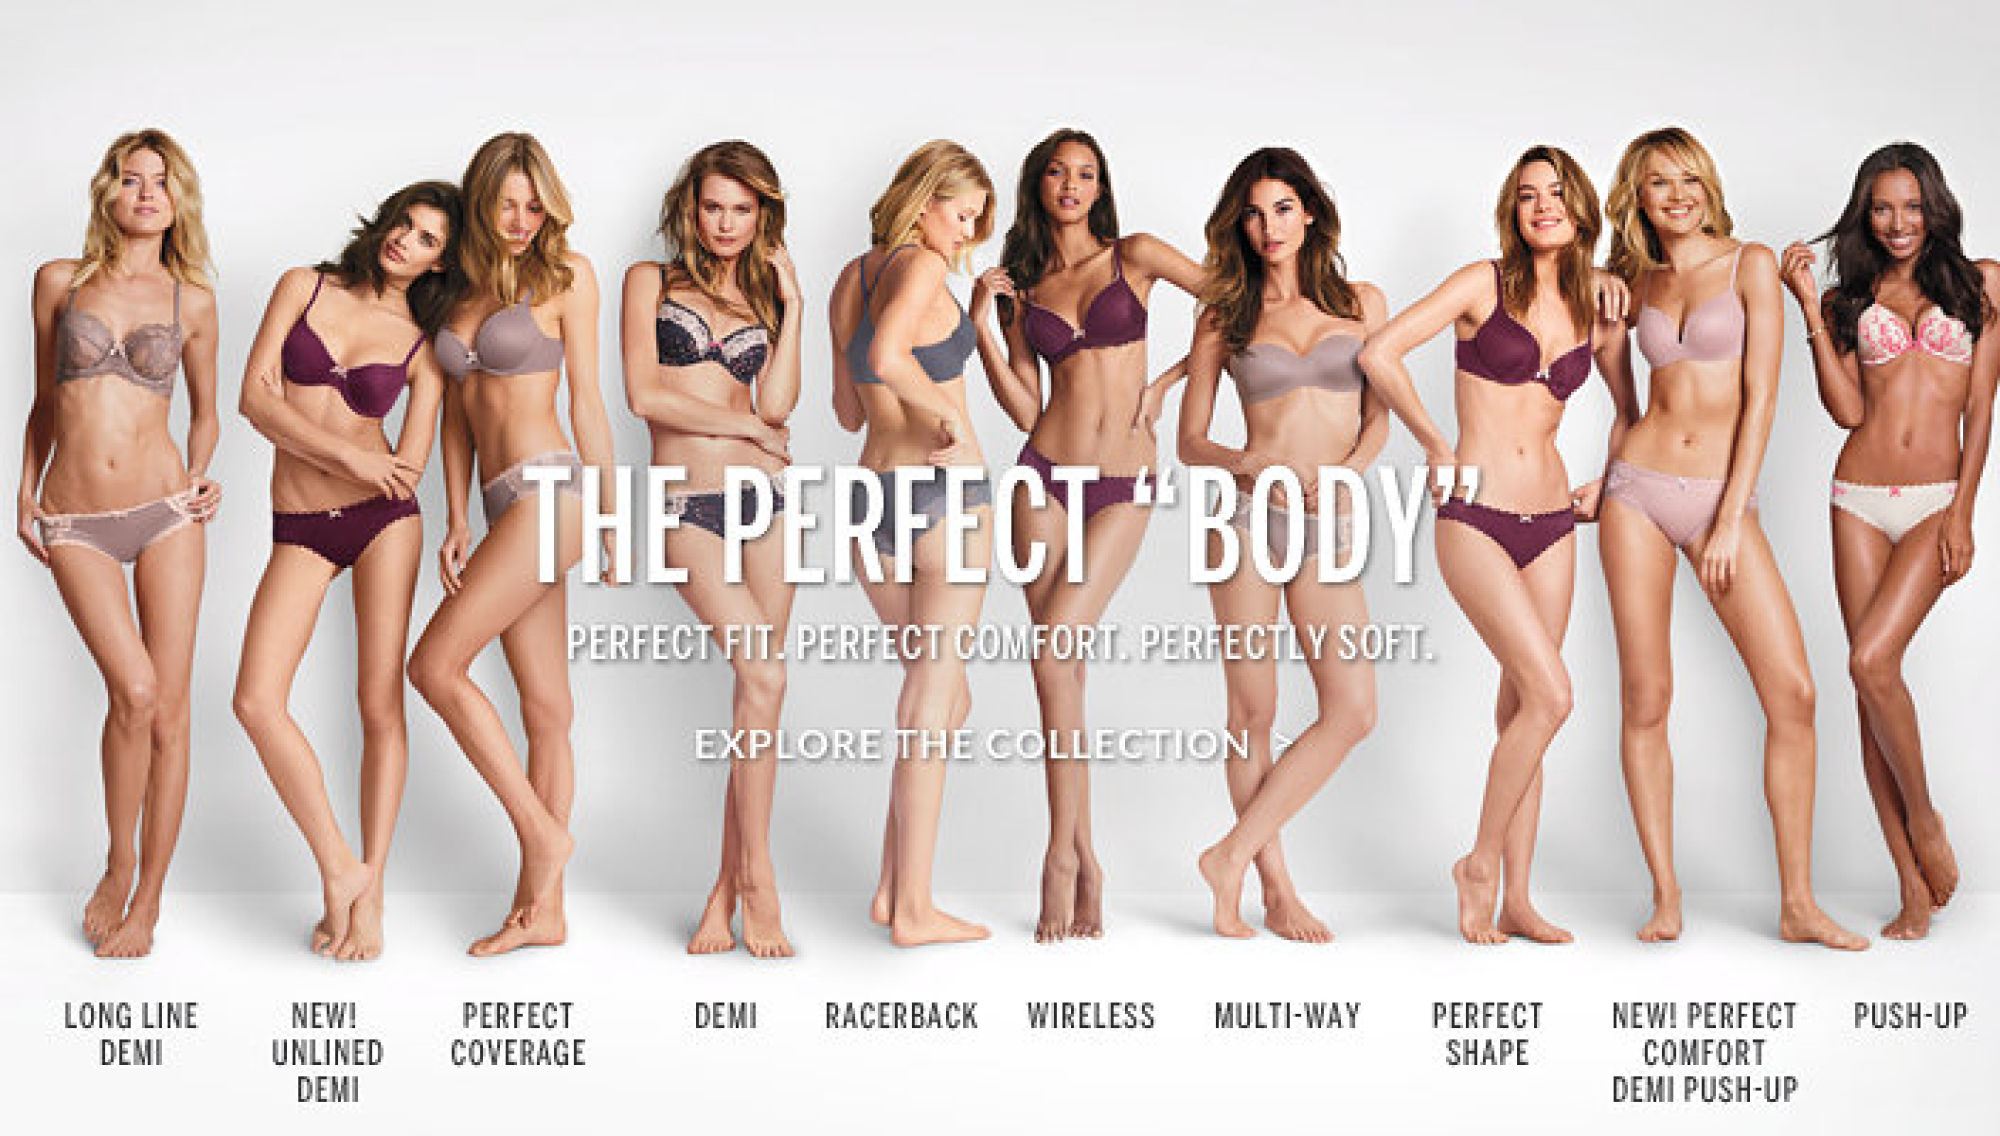 Victoria's Secret has the perfect body (but it's not yours)